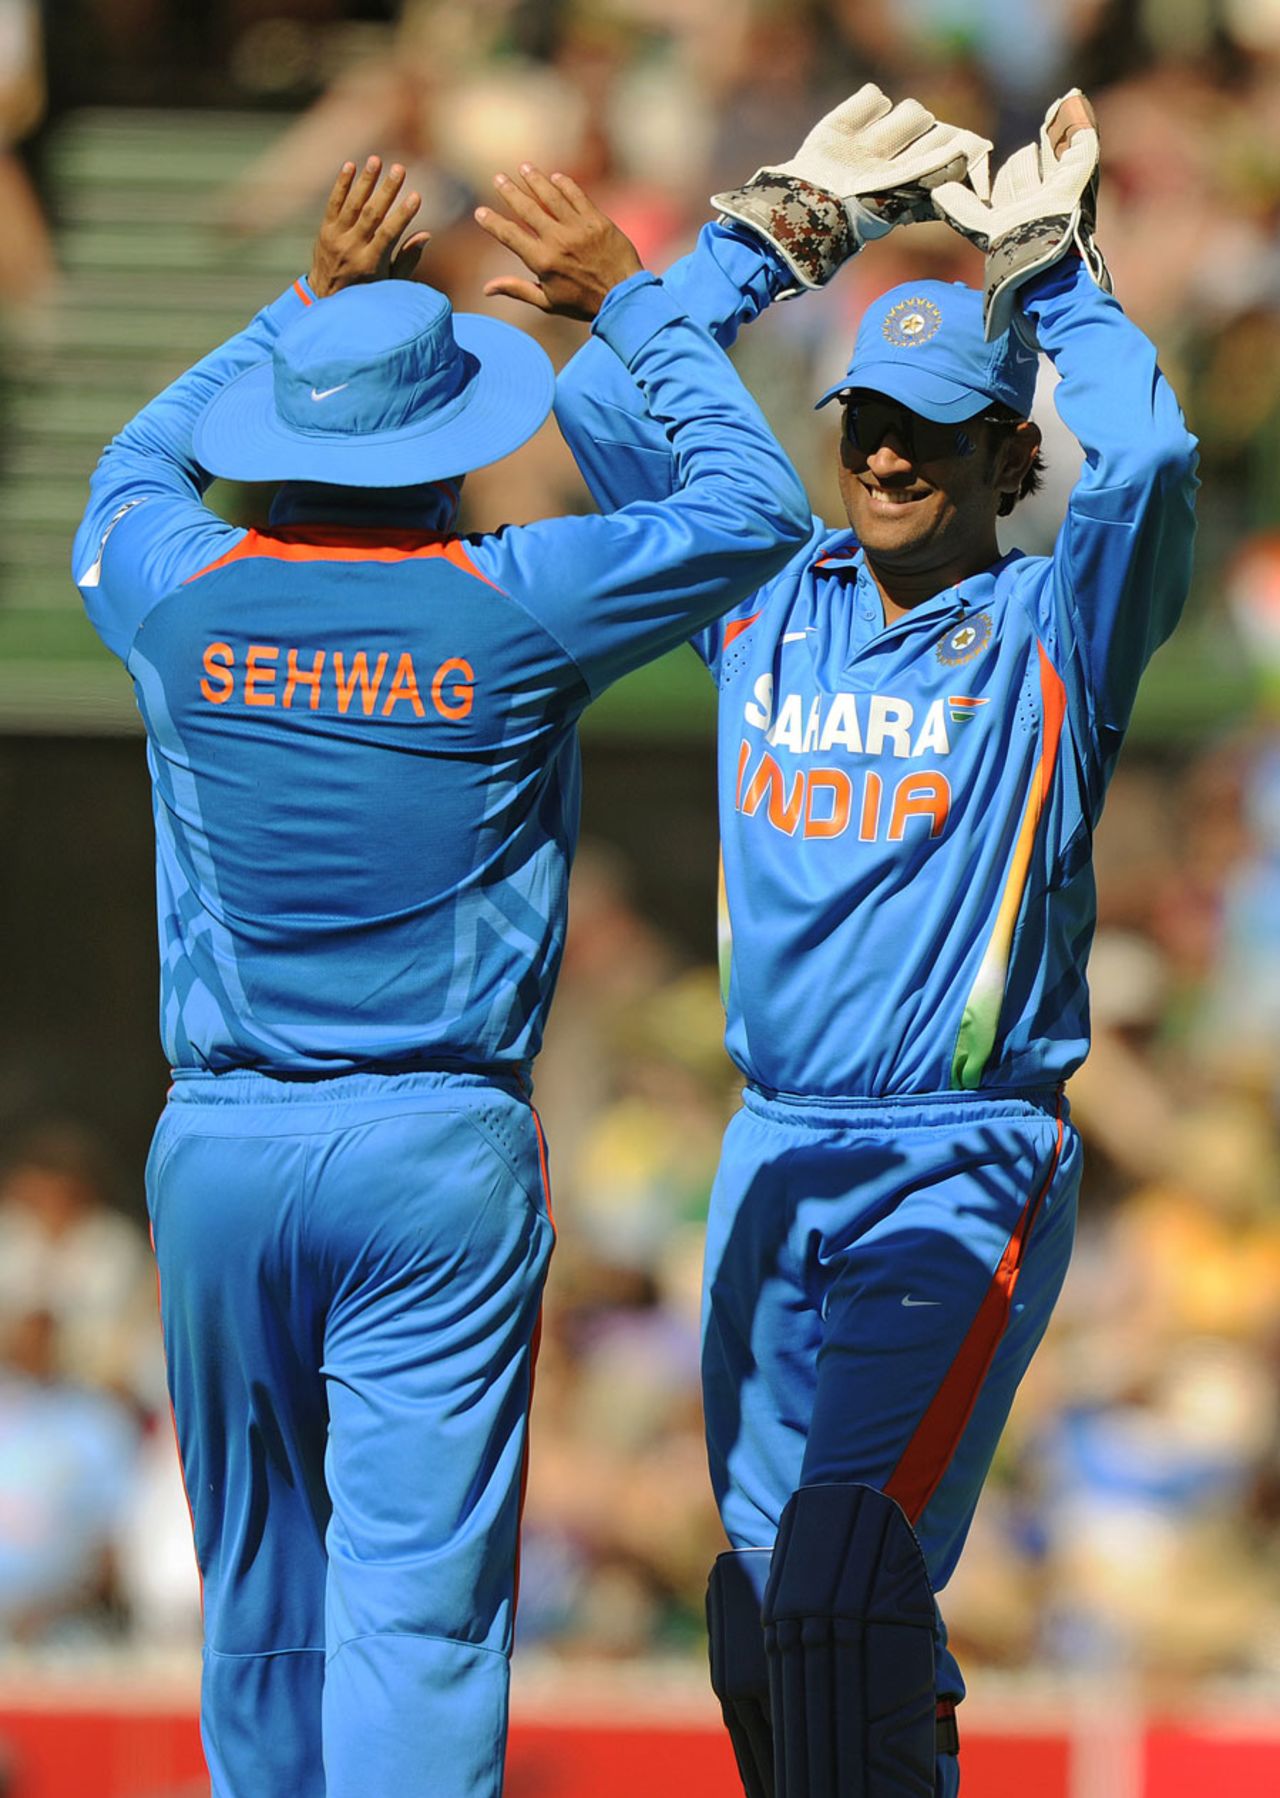 MS Dhoni congratulates Virender Sehwag on catching David Hussey, Australia v India, Commonwealth Bank Series, Adelaide, February 12, 2012
